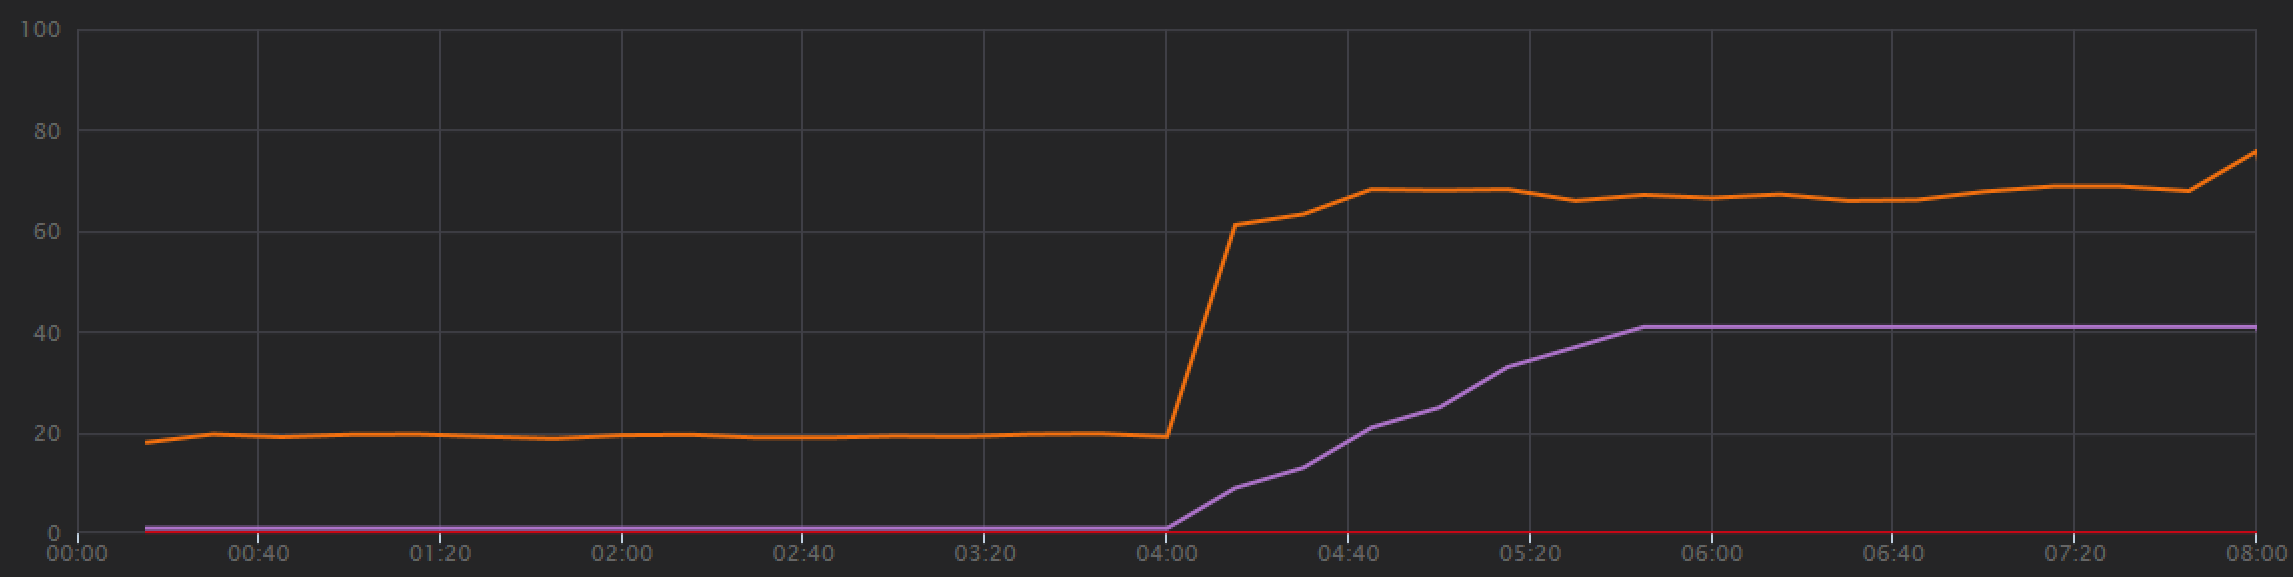 Graph of Visual Studio load test results showing higher overall throughput that keeps pace with load.